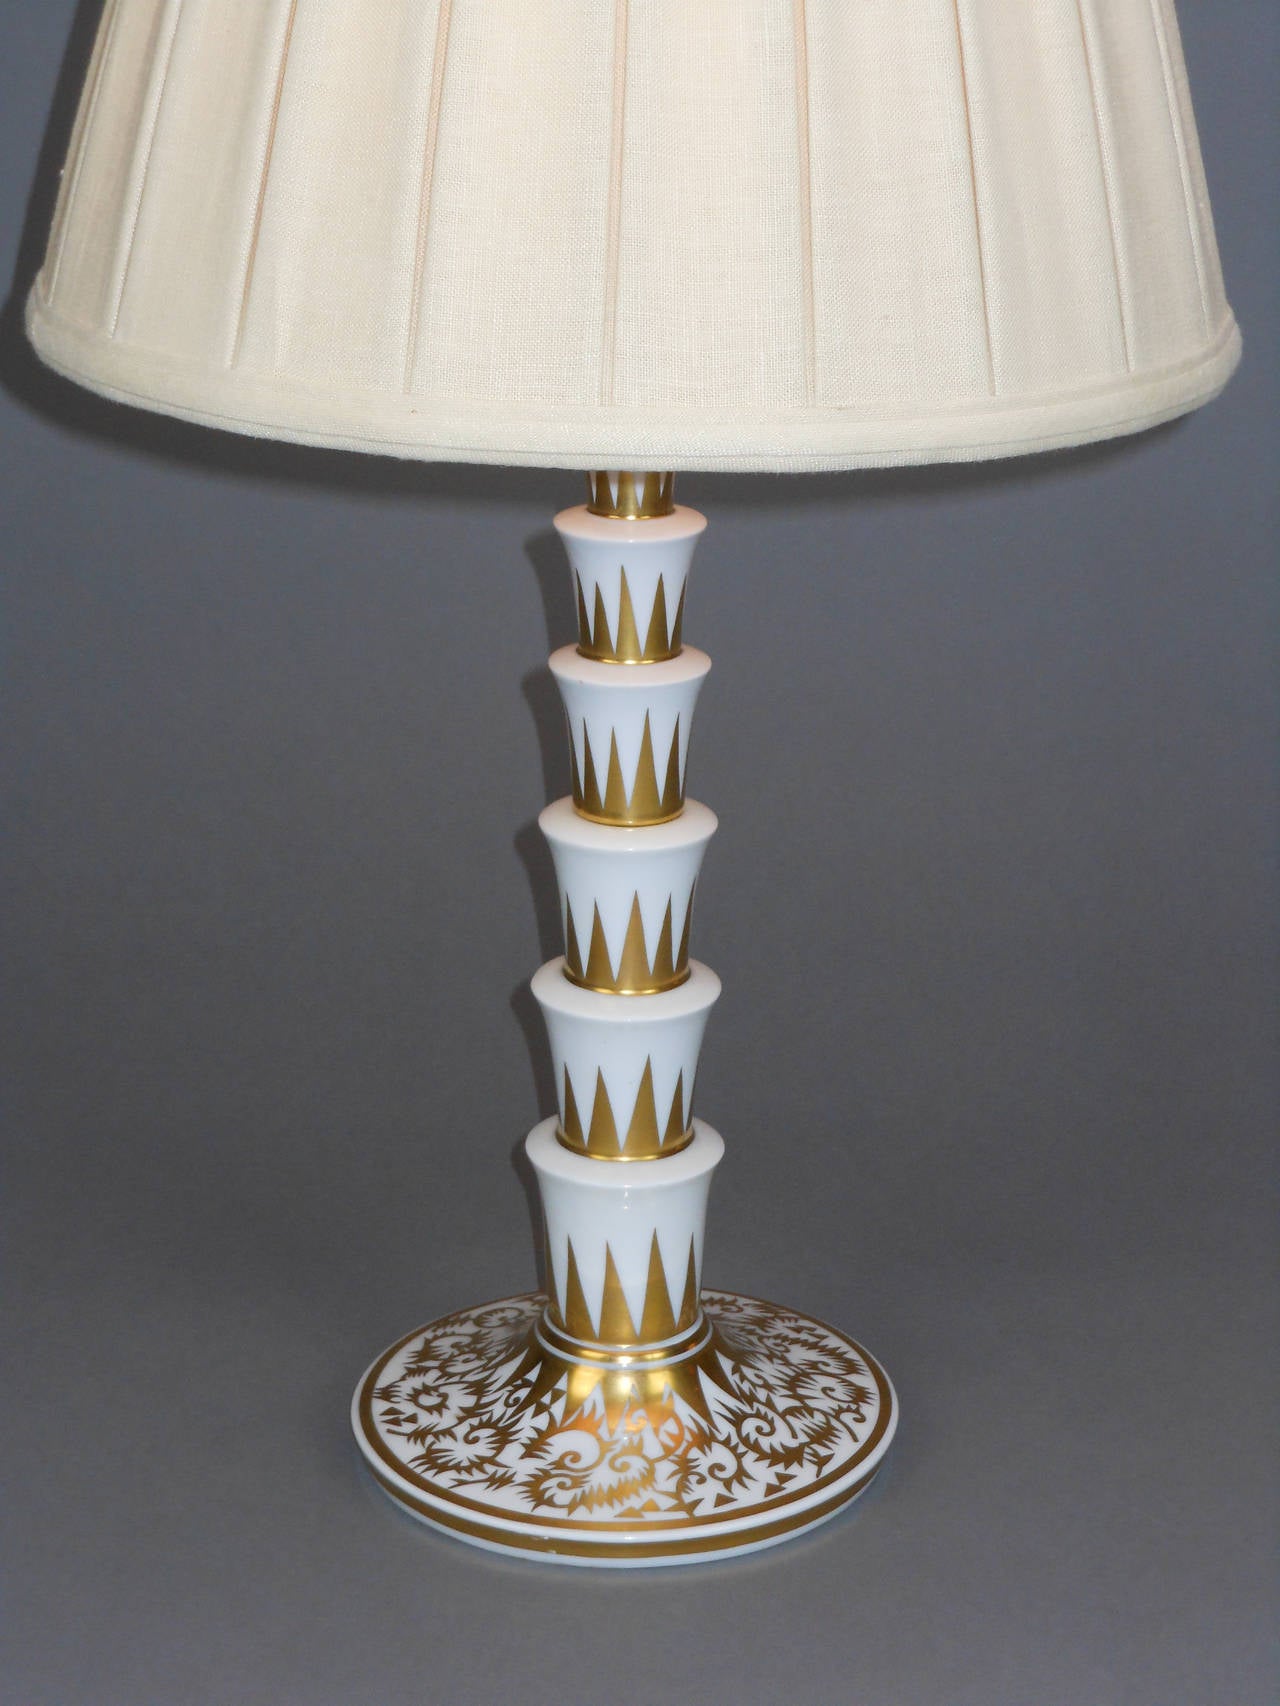 This German Rosenthal lamp features a column of cascading tiers above the domed circular base.

Marked: 50 JAHRE 50 DIE WELTMARKE Rosenthals SELB BAVARIA
Measures: Height to light fitting 15"
Height to top of shade 25".